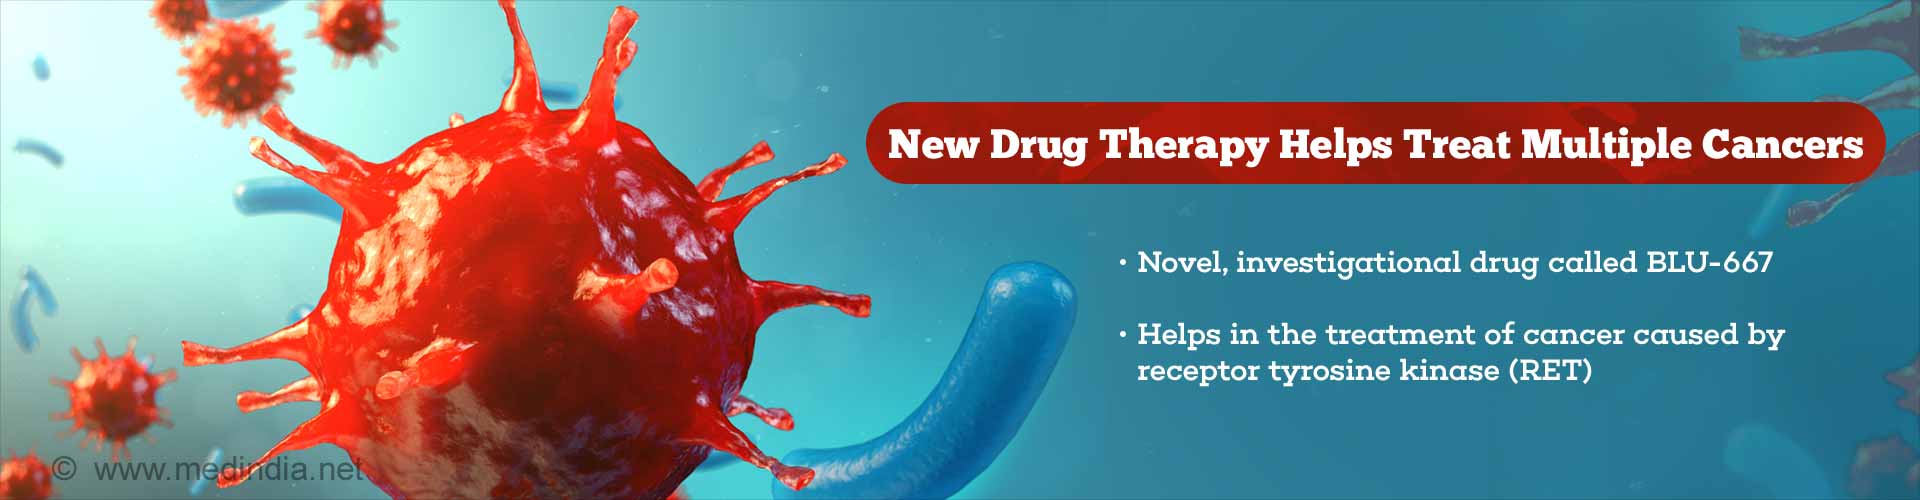 new drug therapy helps treat multiple cancers
- novel, investigational drug called BLU-667
- healps in treatment of cancer caused by receptor tyrosine kinase (RET)